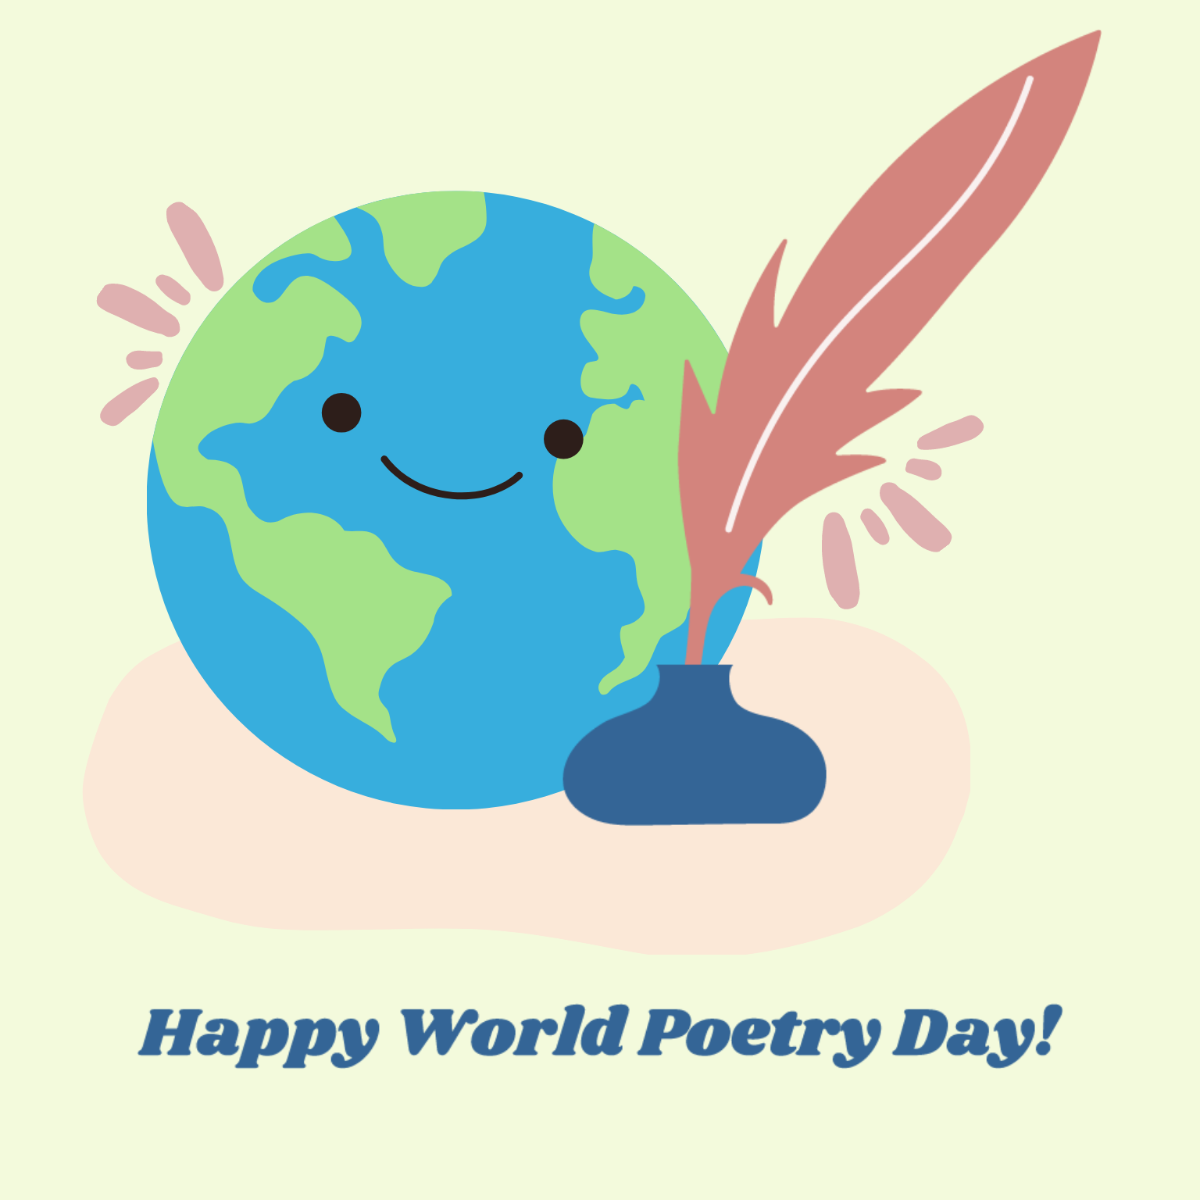 World Poetry Day Celebration Vector Template